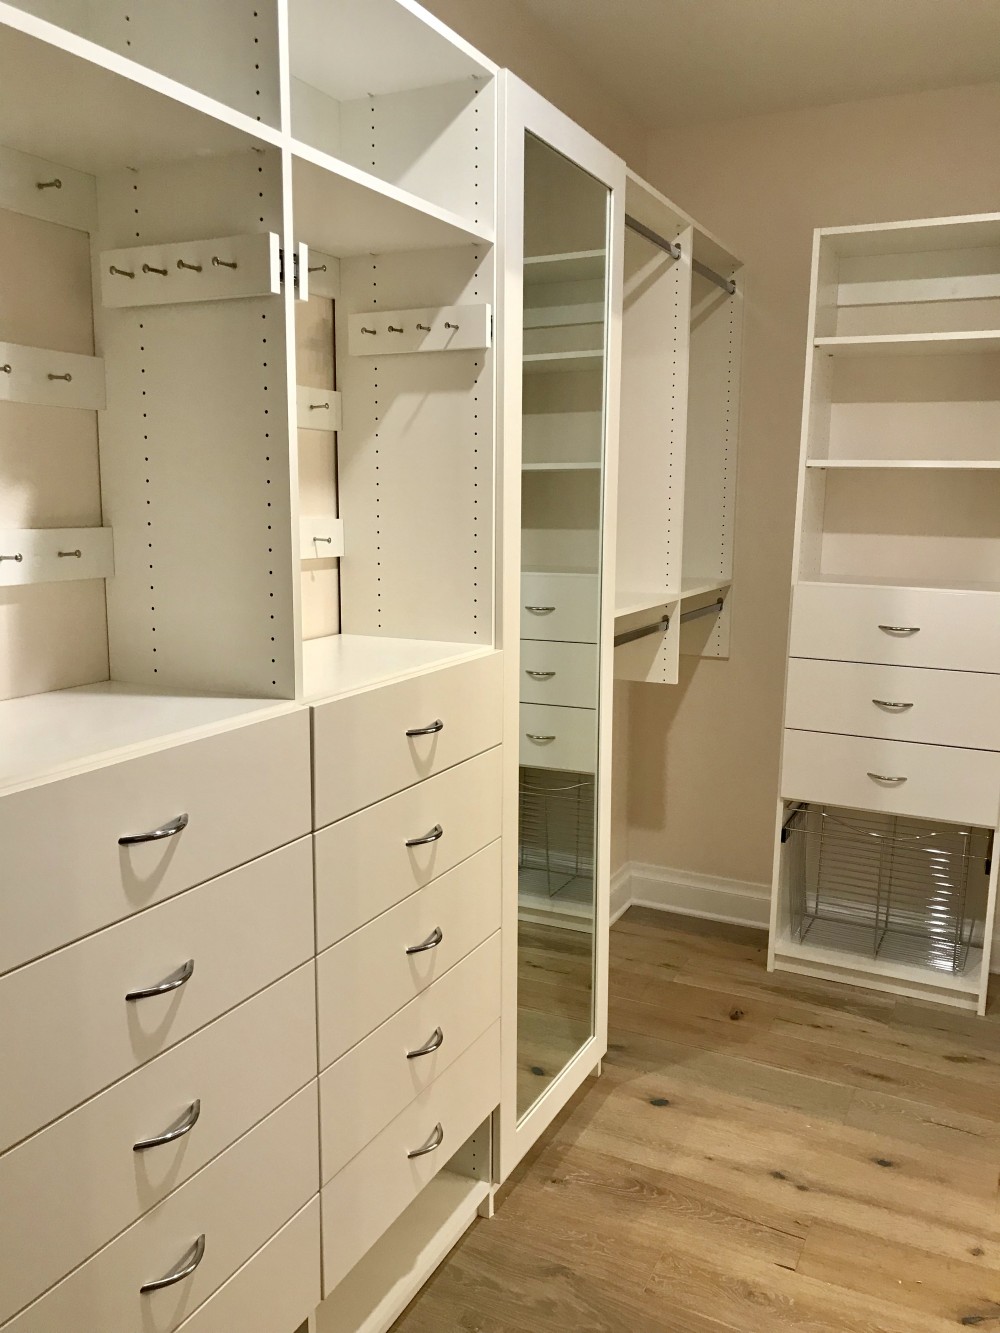 Walk-In Closet designs from Closets-N-More